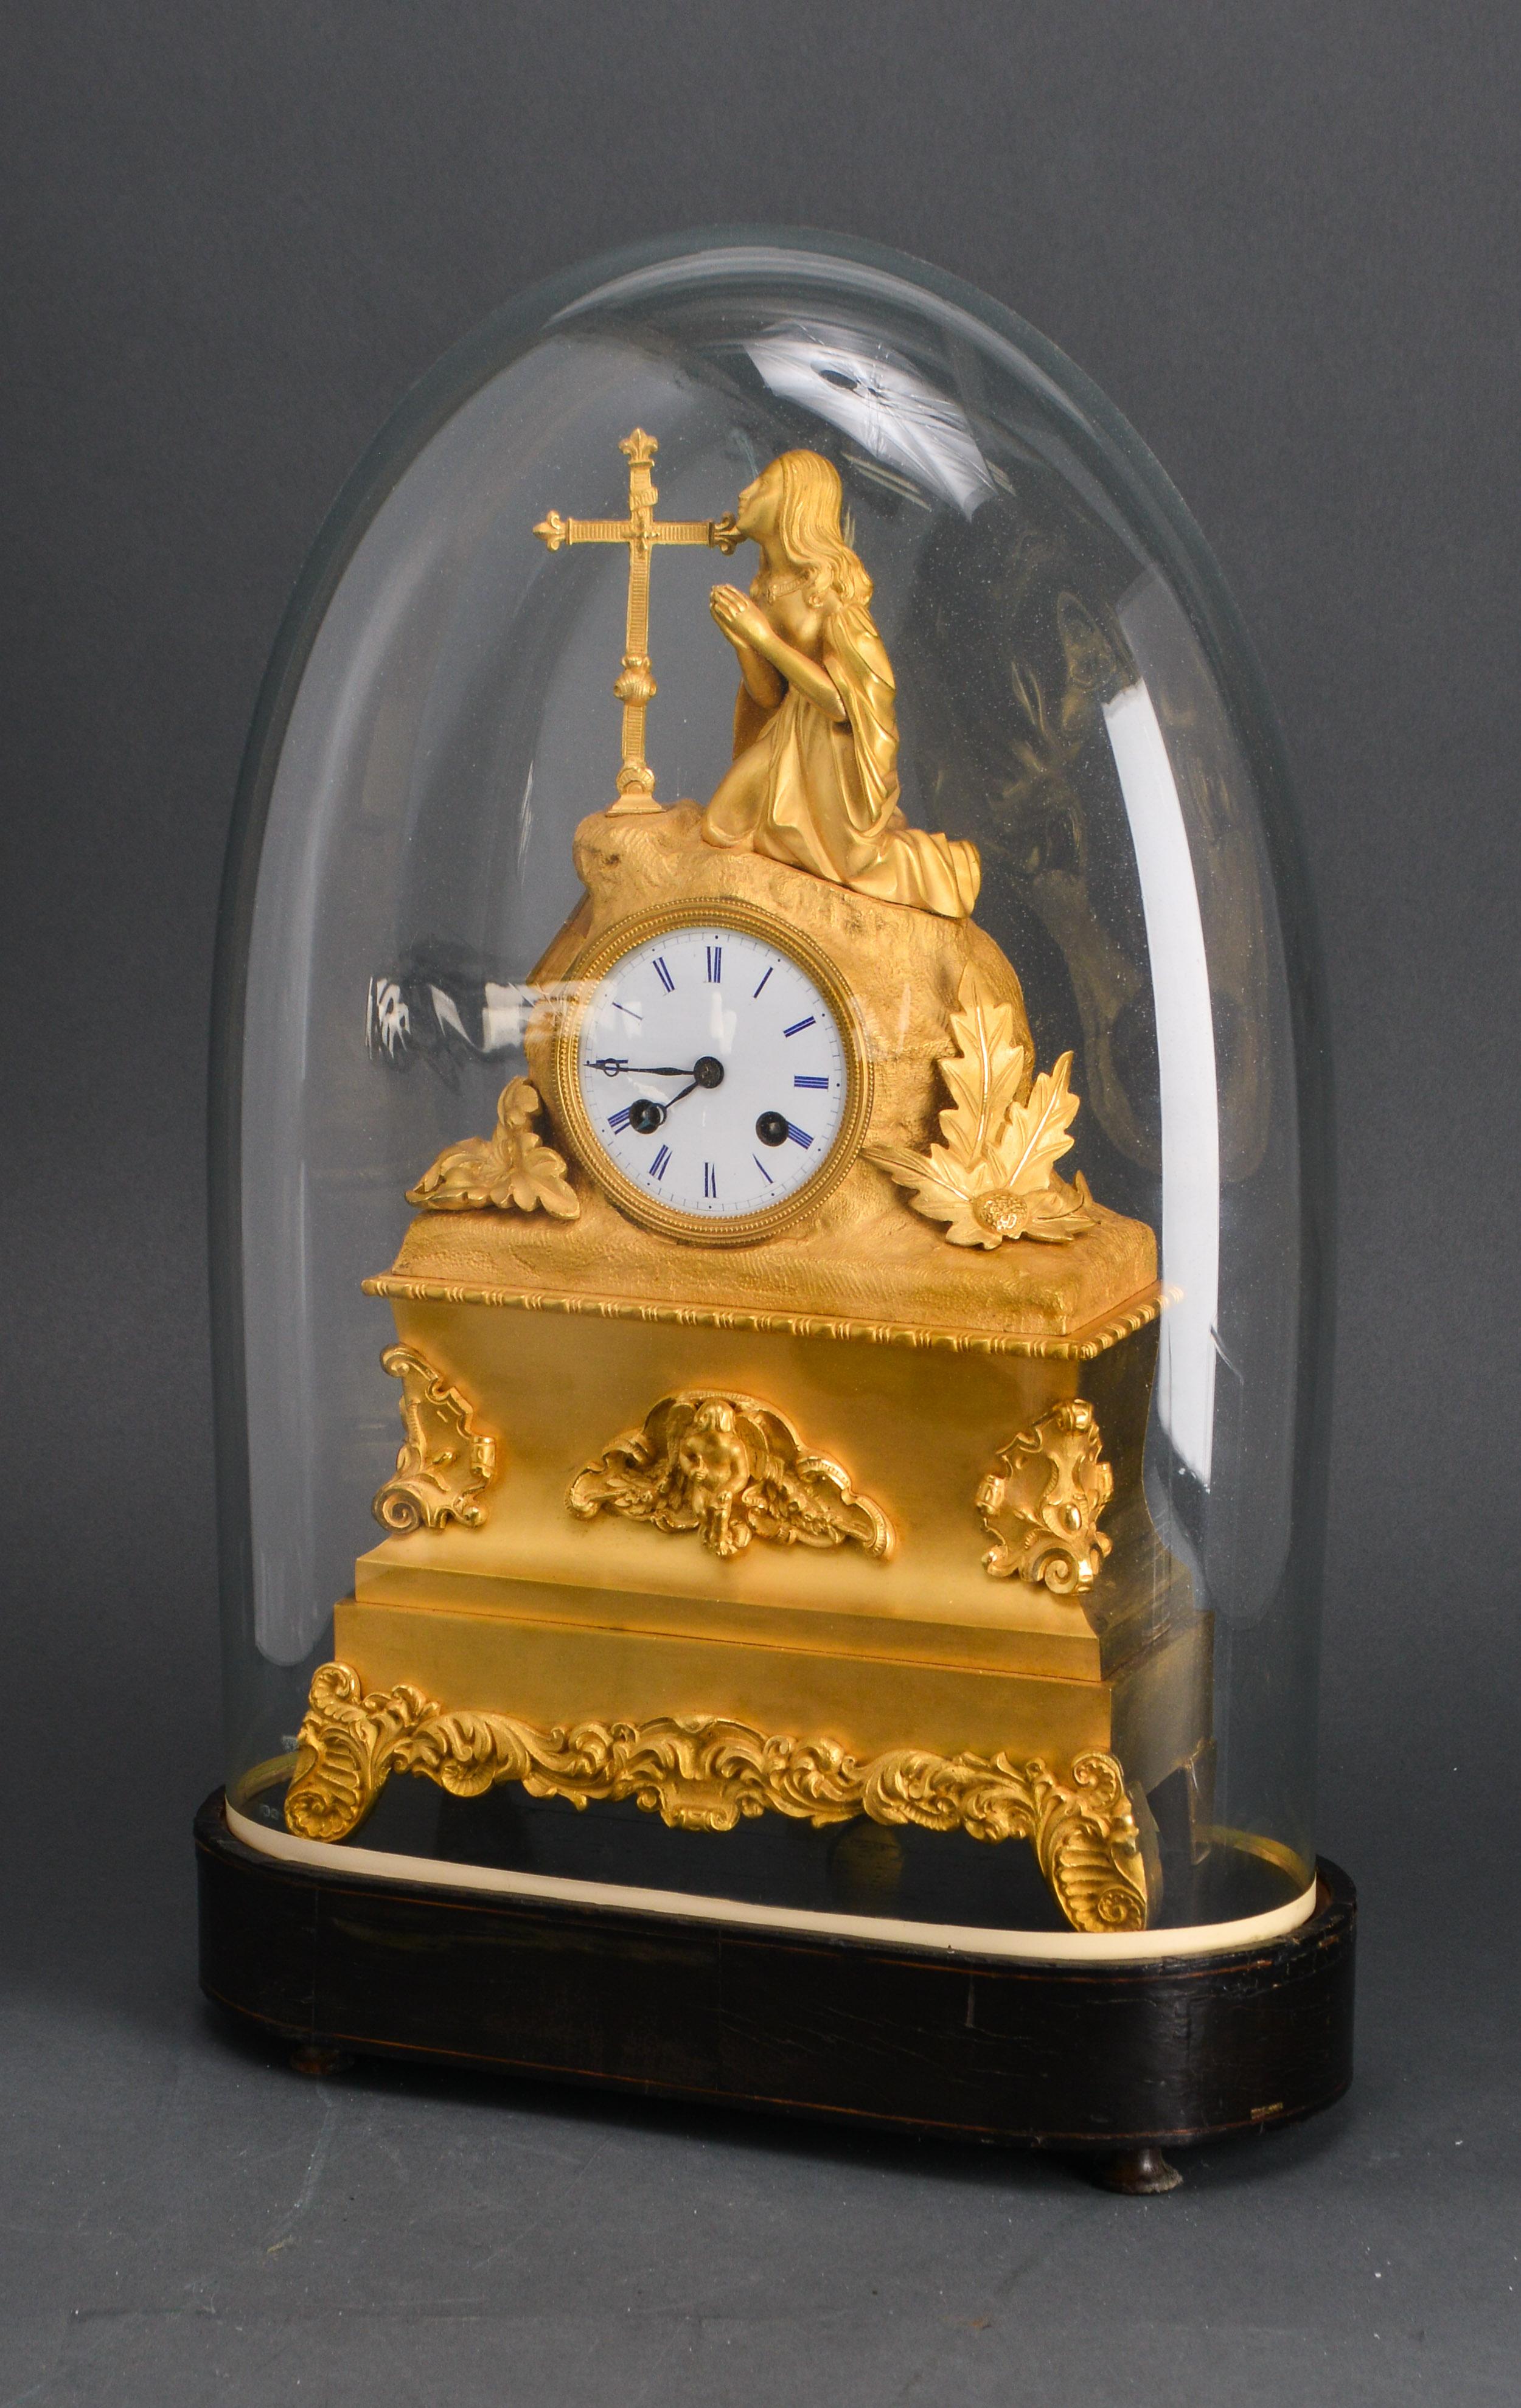 French gilt ormolu bronze chiming clock with white porcelain dial with black hands and blue Roman numerals and a kneeling praying female figure in front of a cross. The piece is housed under a Victorian glass dome and dates from the late 19th